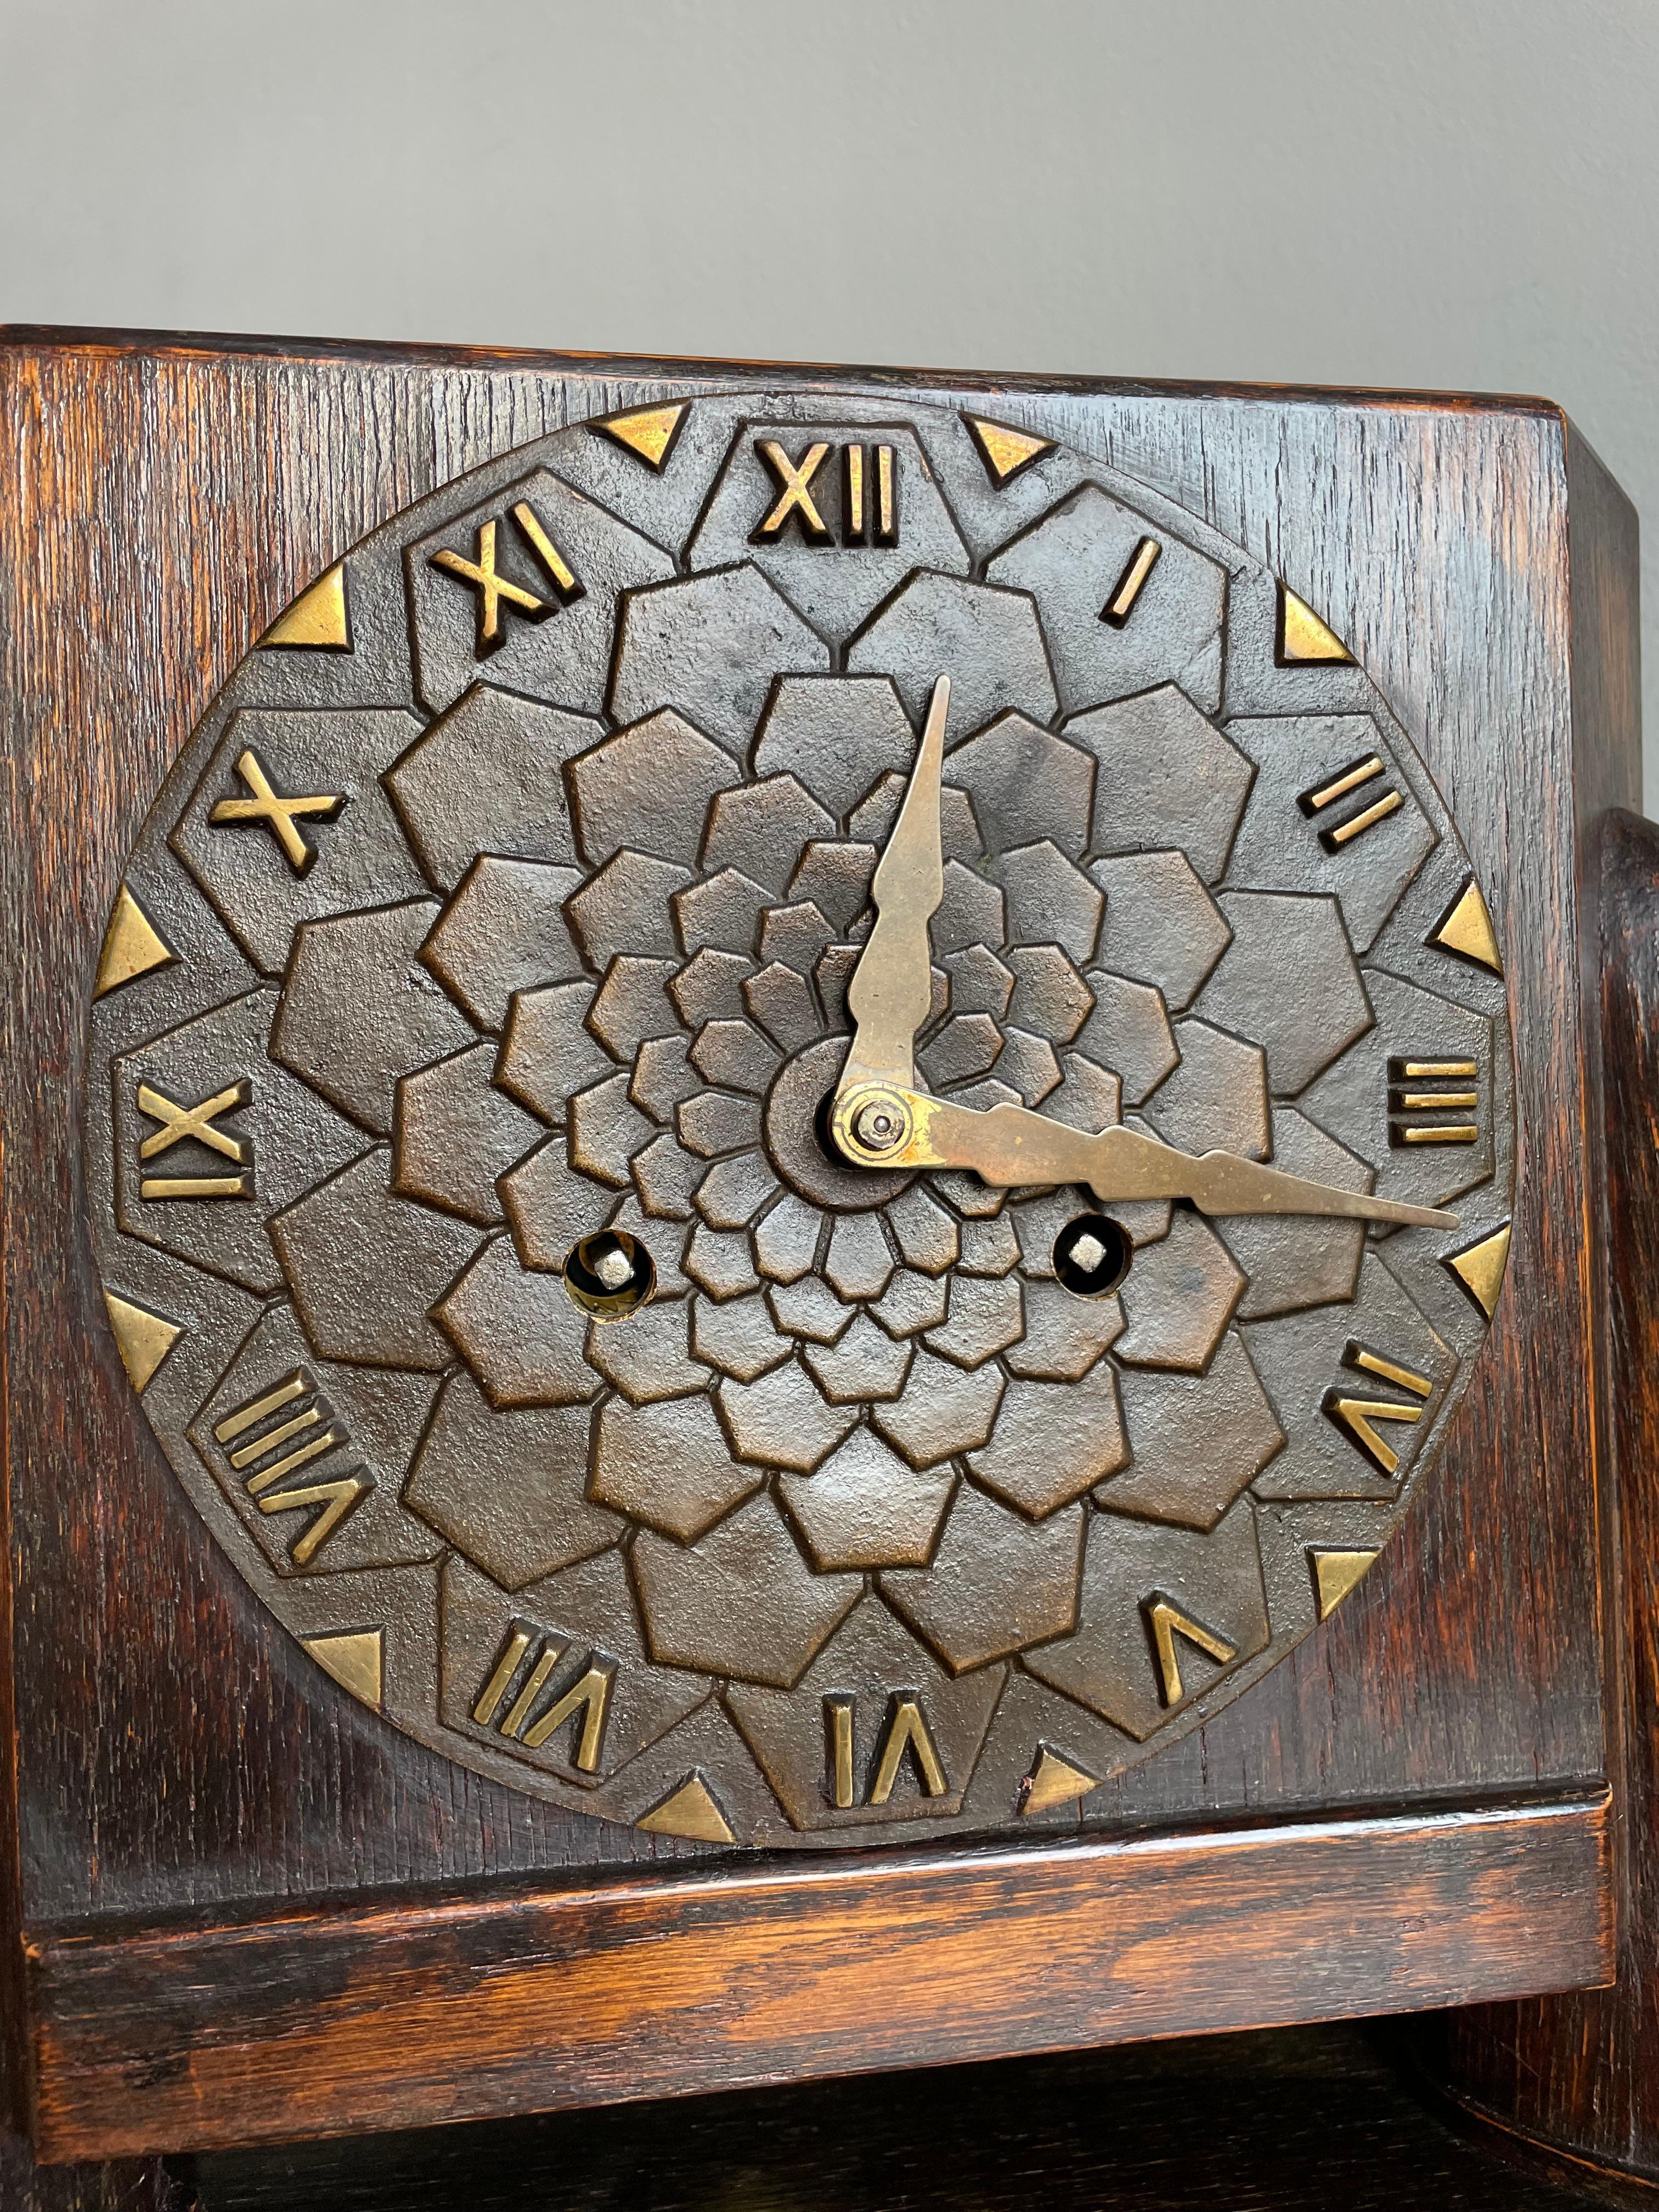 Stained Dutch Arts & Crafts Oak Mantle / Desk Clock with Stunning Bronze Dial Face 1915 For Sale